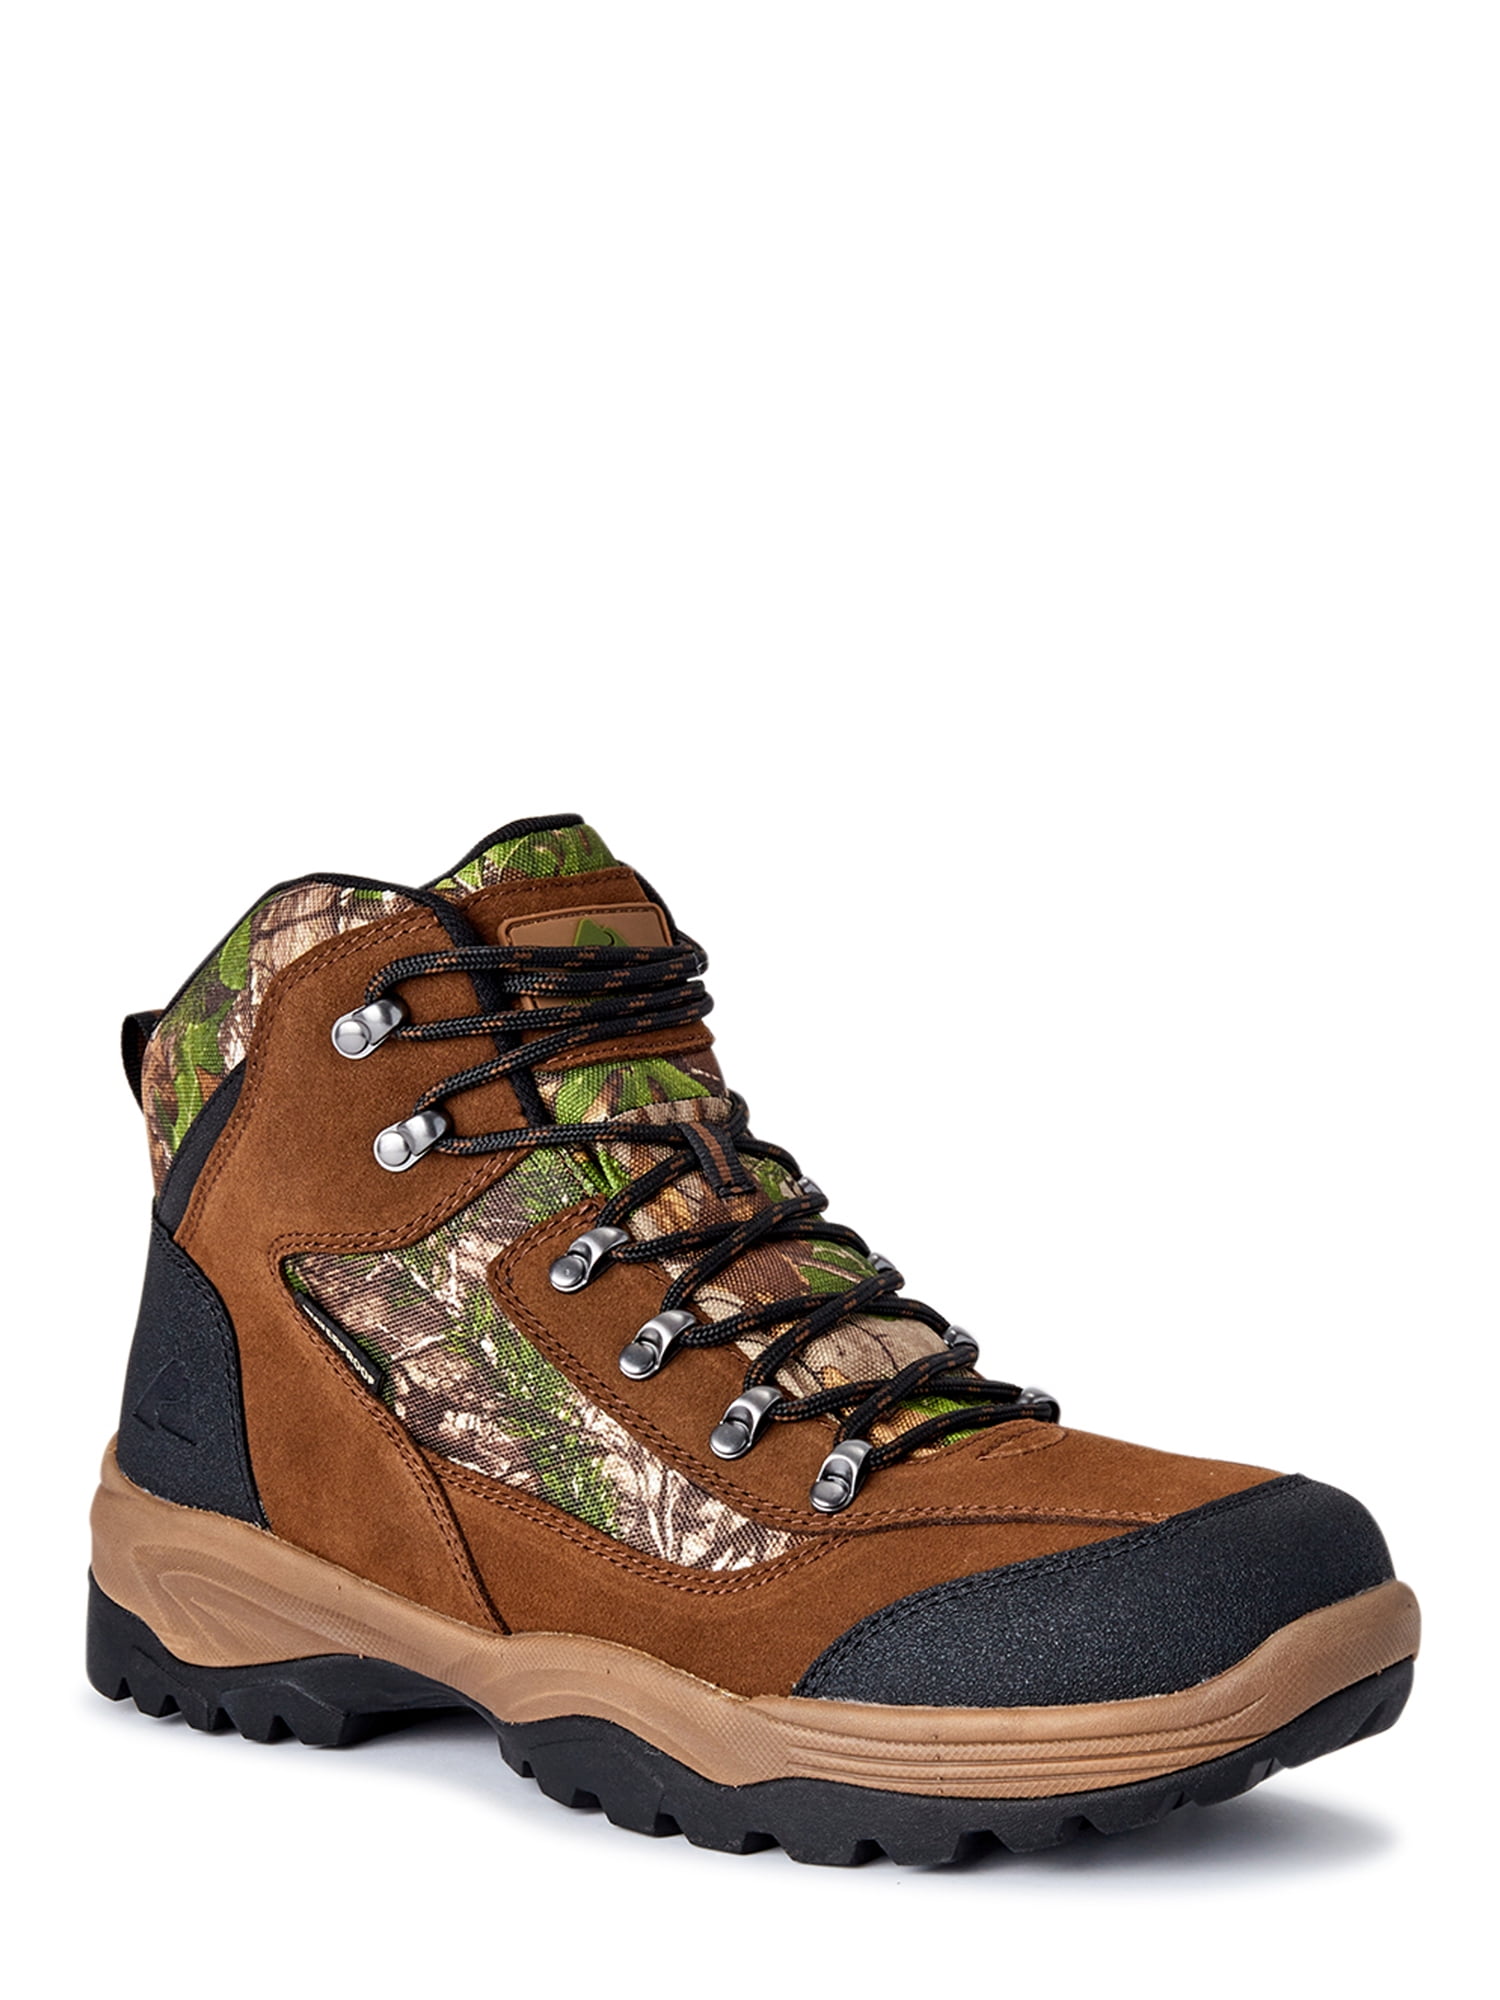 Ozark Trail Men's Brush Ankle-High Waterproof Camo Mid Hiking Boots